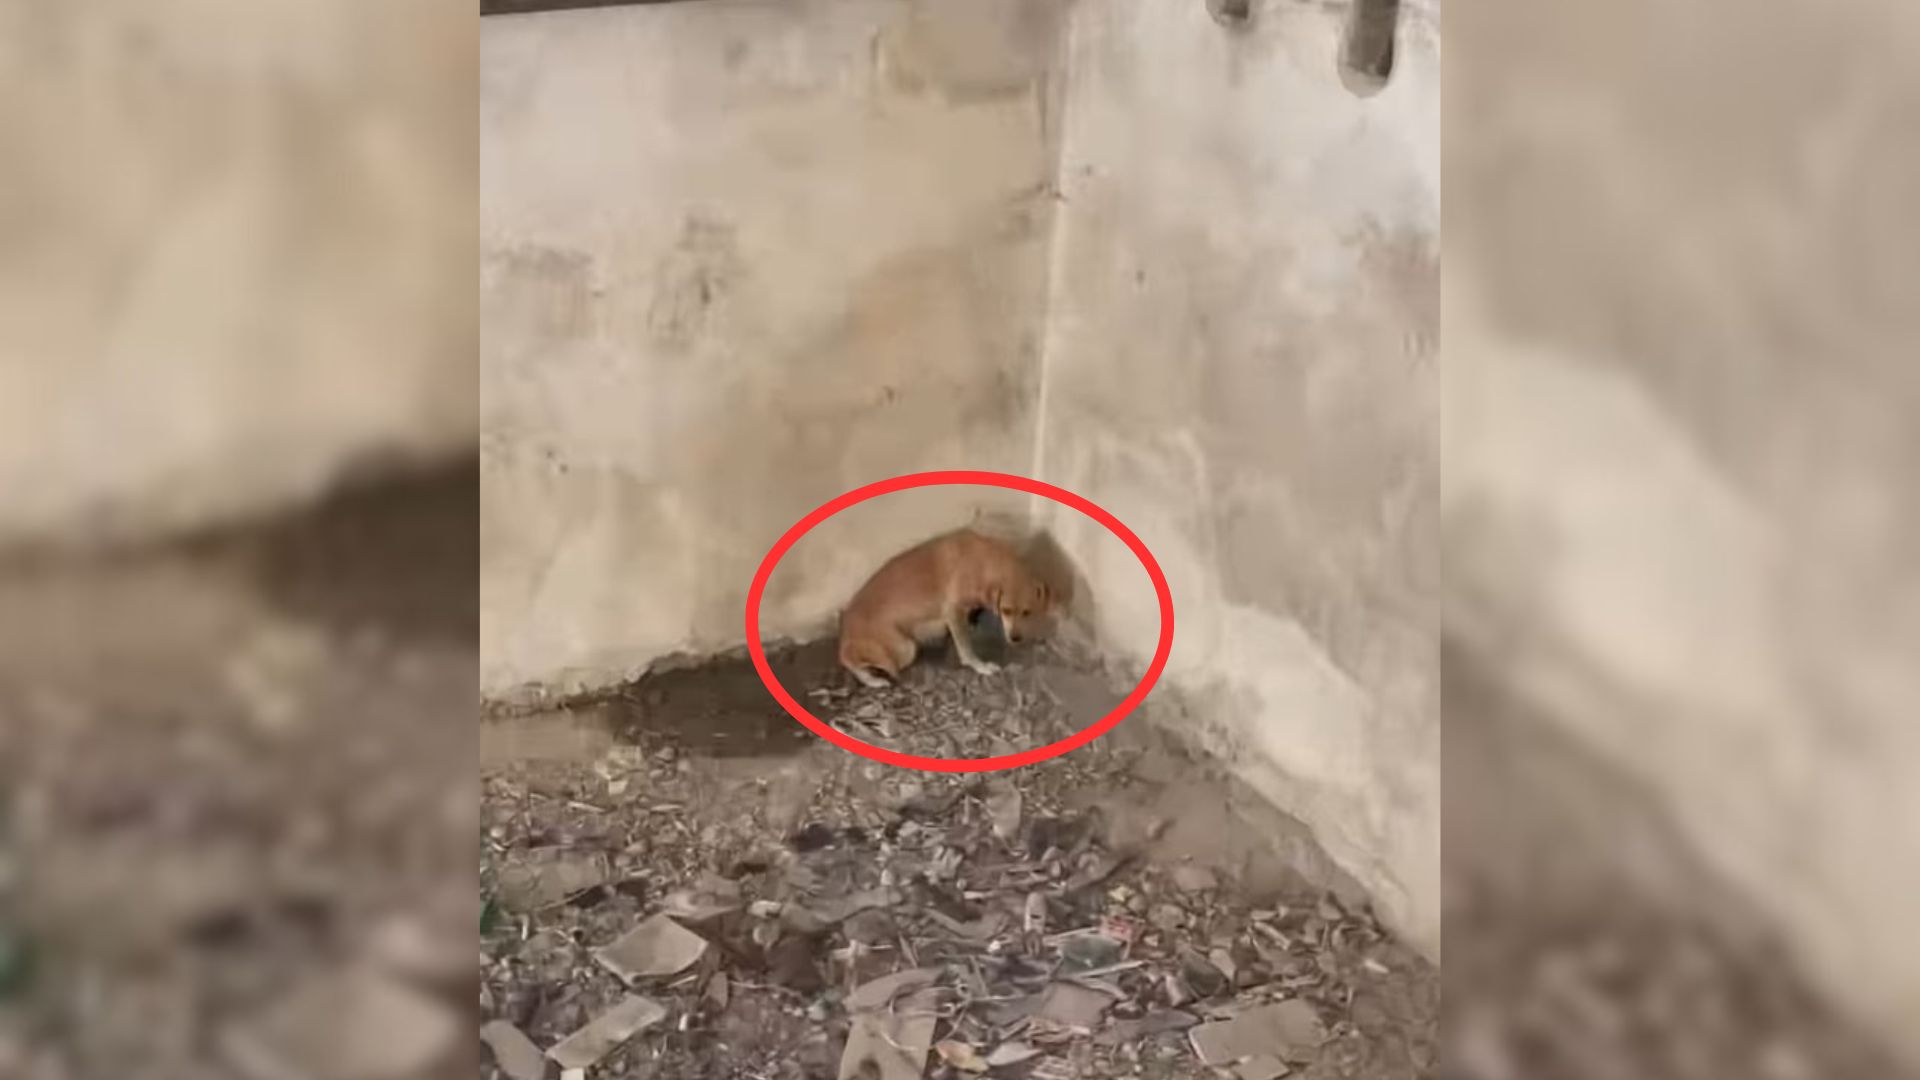 Mama Dog Cried Her Heart As She Struggles To Rescue Her Puppies From Pit They Were Cruelly Dumped In